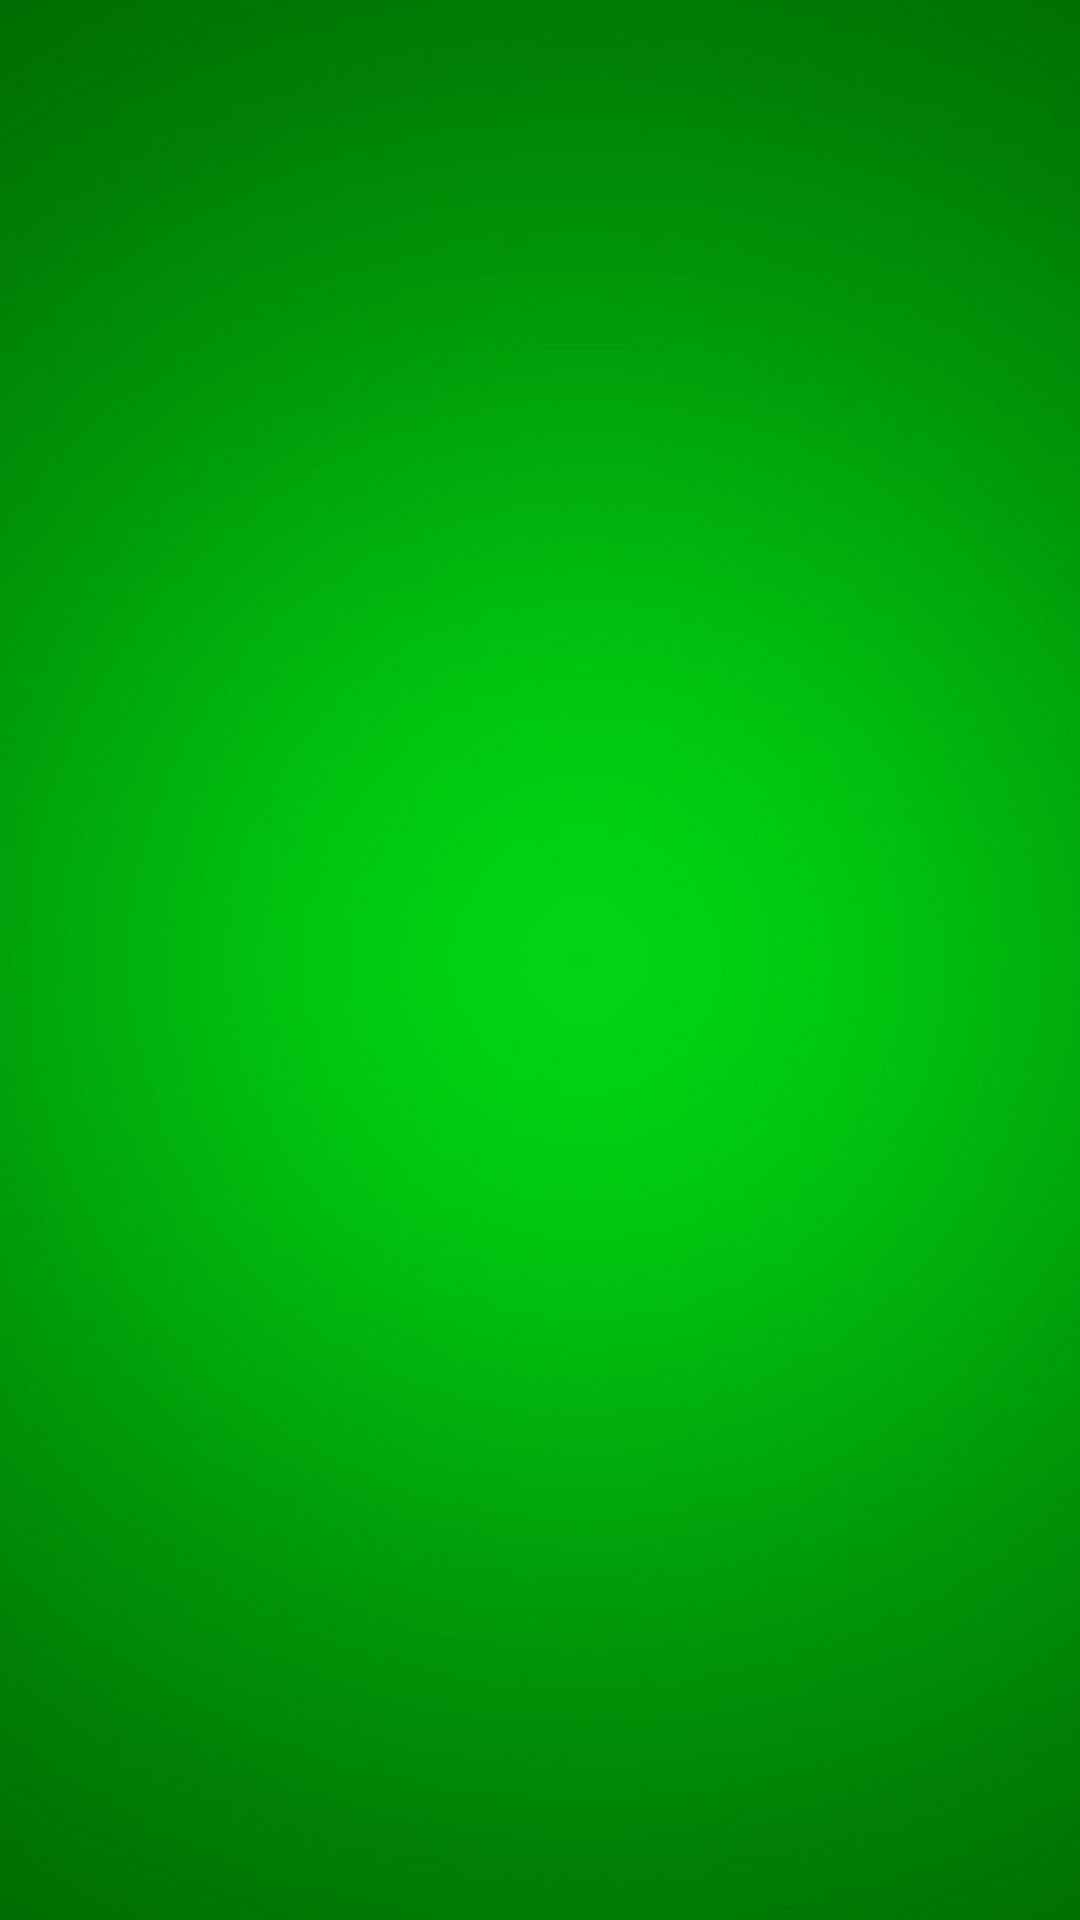 Green Android Wallpaper with image resolution 1080x1920 pixel. You can make this wallpaper for your Android backgrounds, Tablet, Smartphones Screensavers and Mobile Phone Lock Screen